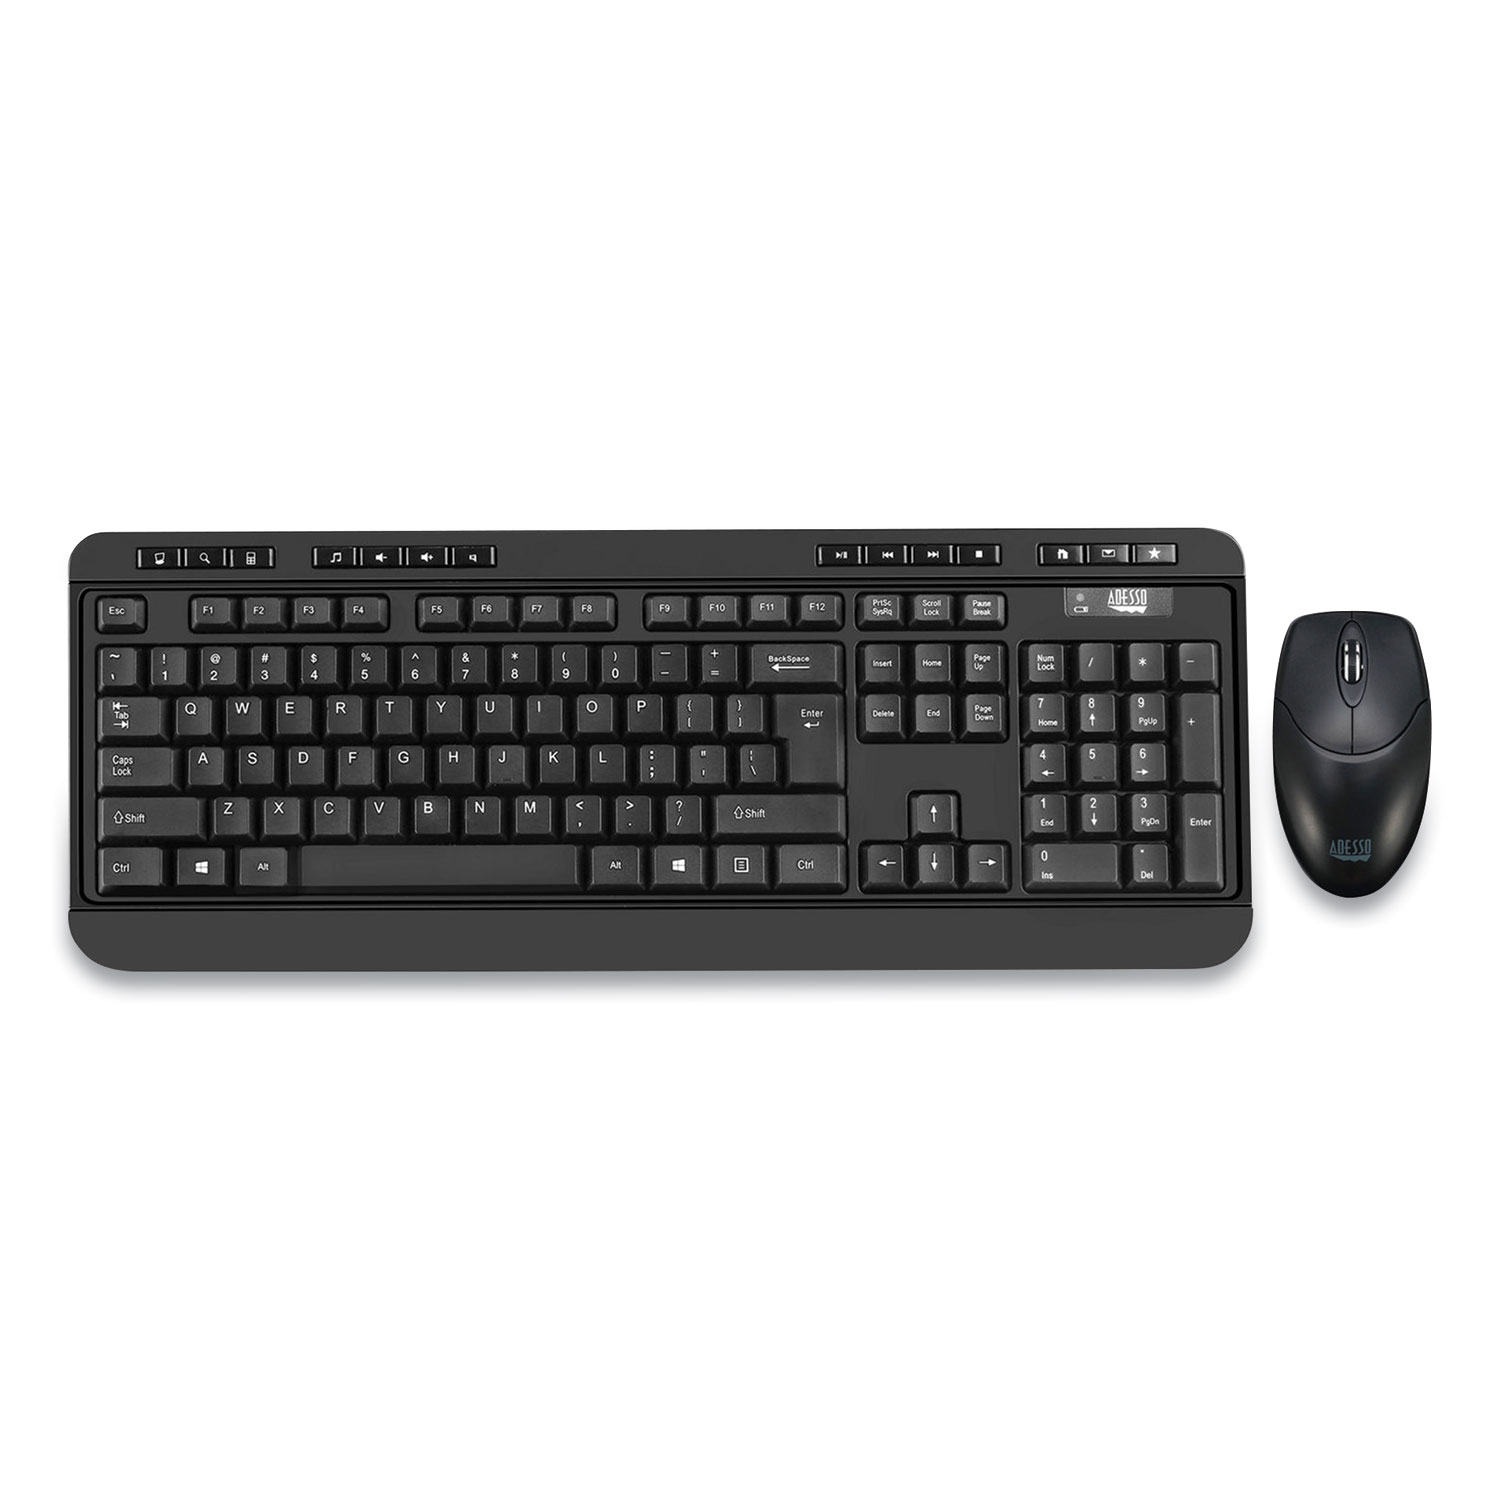  Adesso WKB-1320CB WKB-1320CB Antimicrobial Wireless Desktop Keyboard and Mouse, 2.4 GHz Frequency/30 ft Wireless Range, Black (ADEWKB1320CB) 